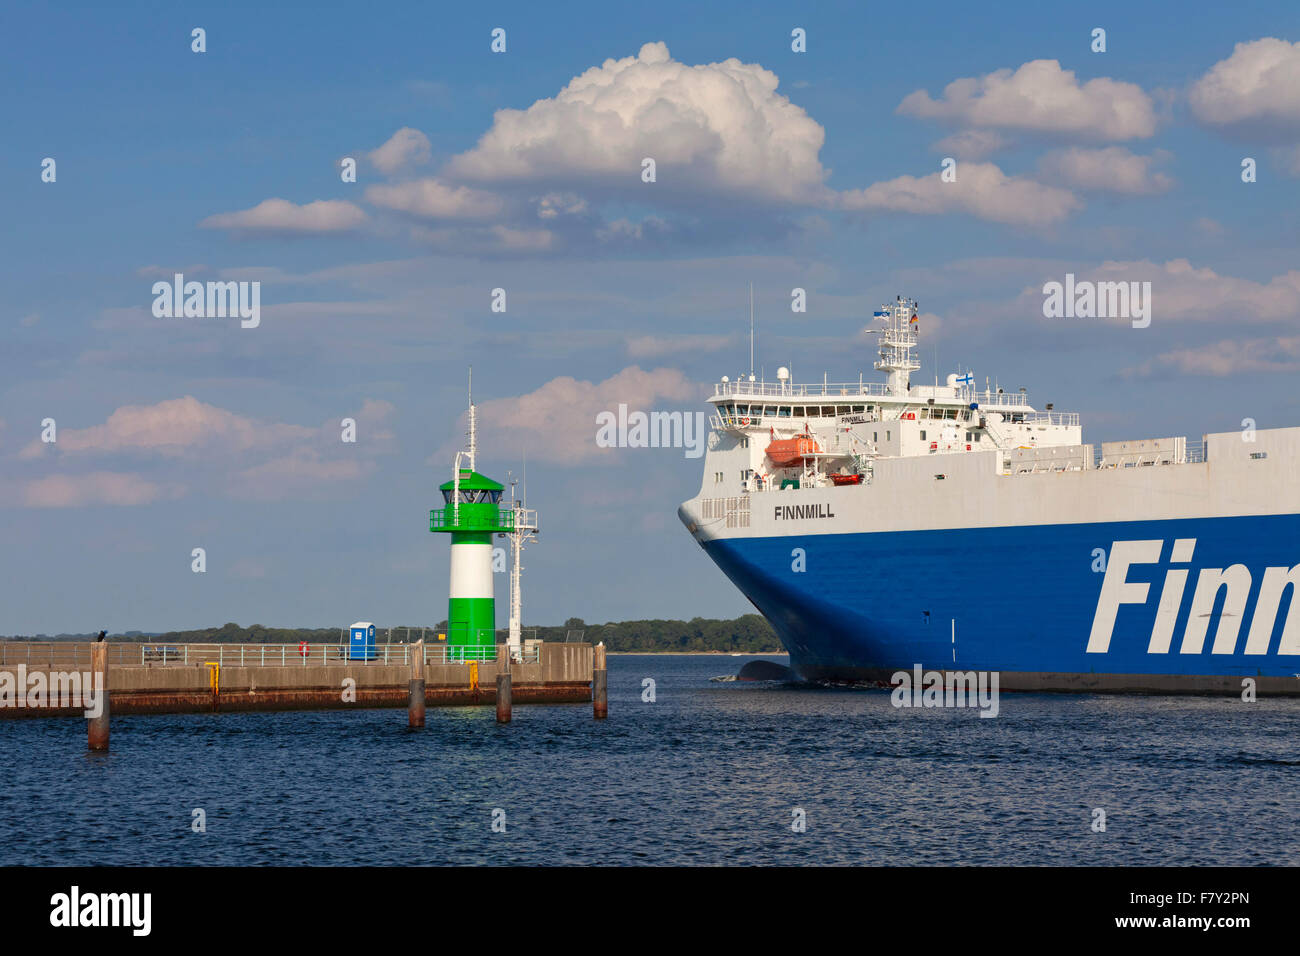 Ro-ro ferry Finnmill from Finnlines passing lighthouse Travemünde Nordmole / Nordmolefeuer, Travemuende, Lübec, Germany Stock Photo